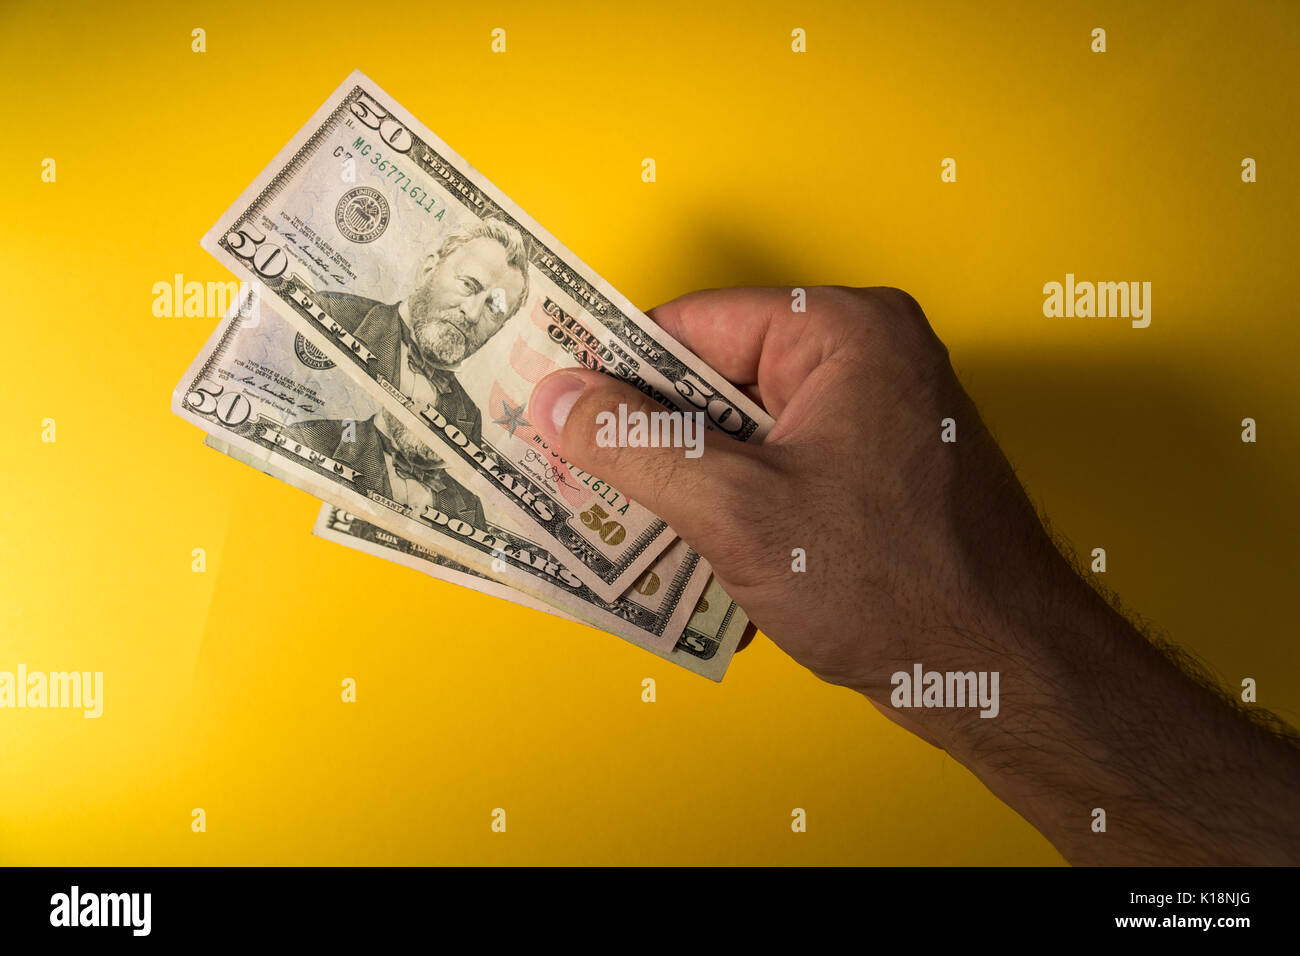 A man's hand holds out dollars. Hand and money on a yellow background. Stock Photo